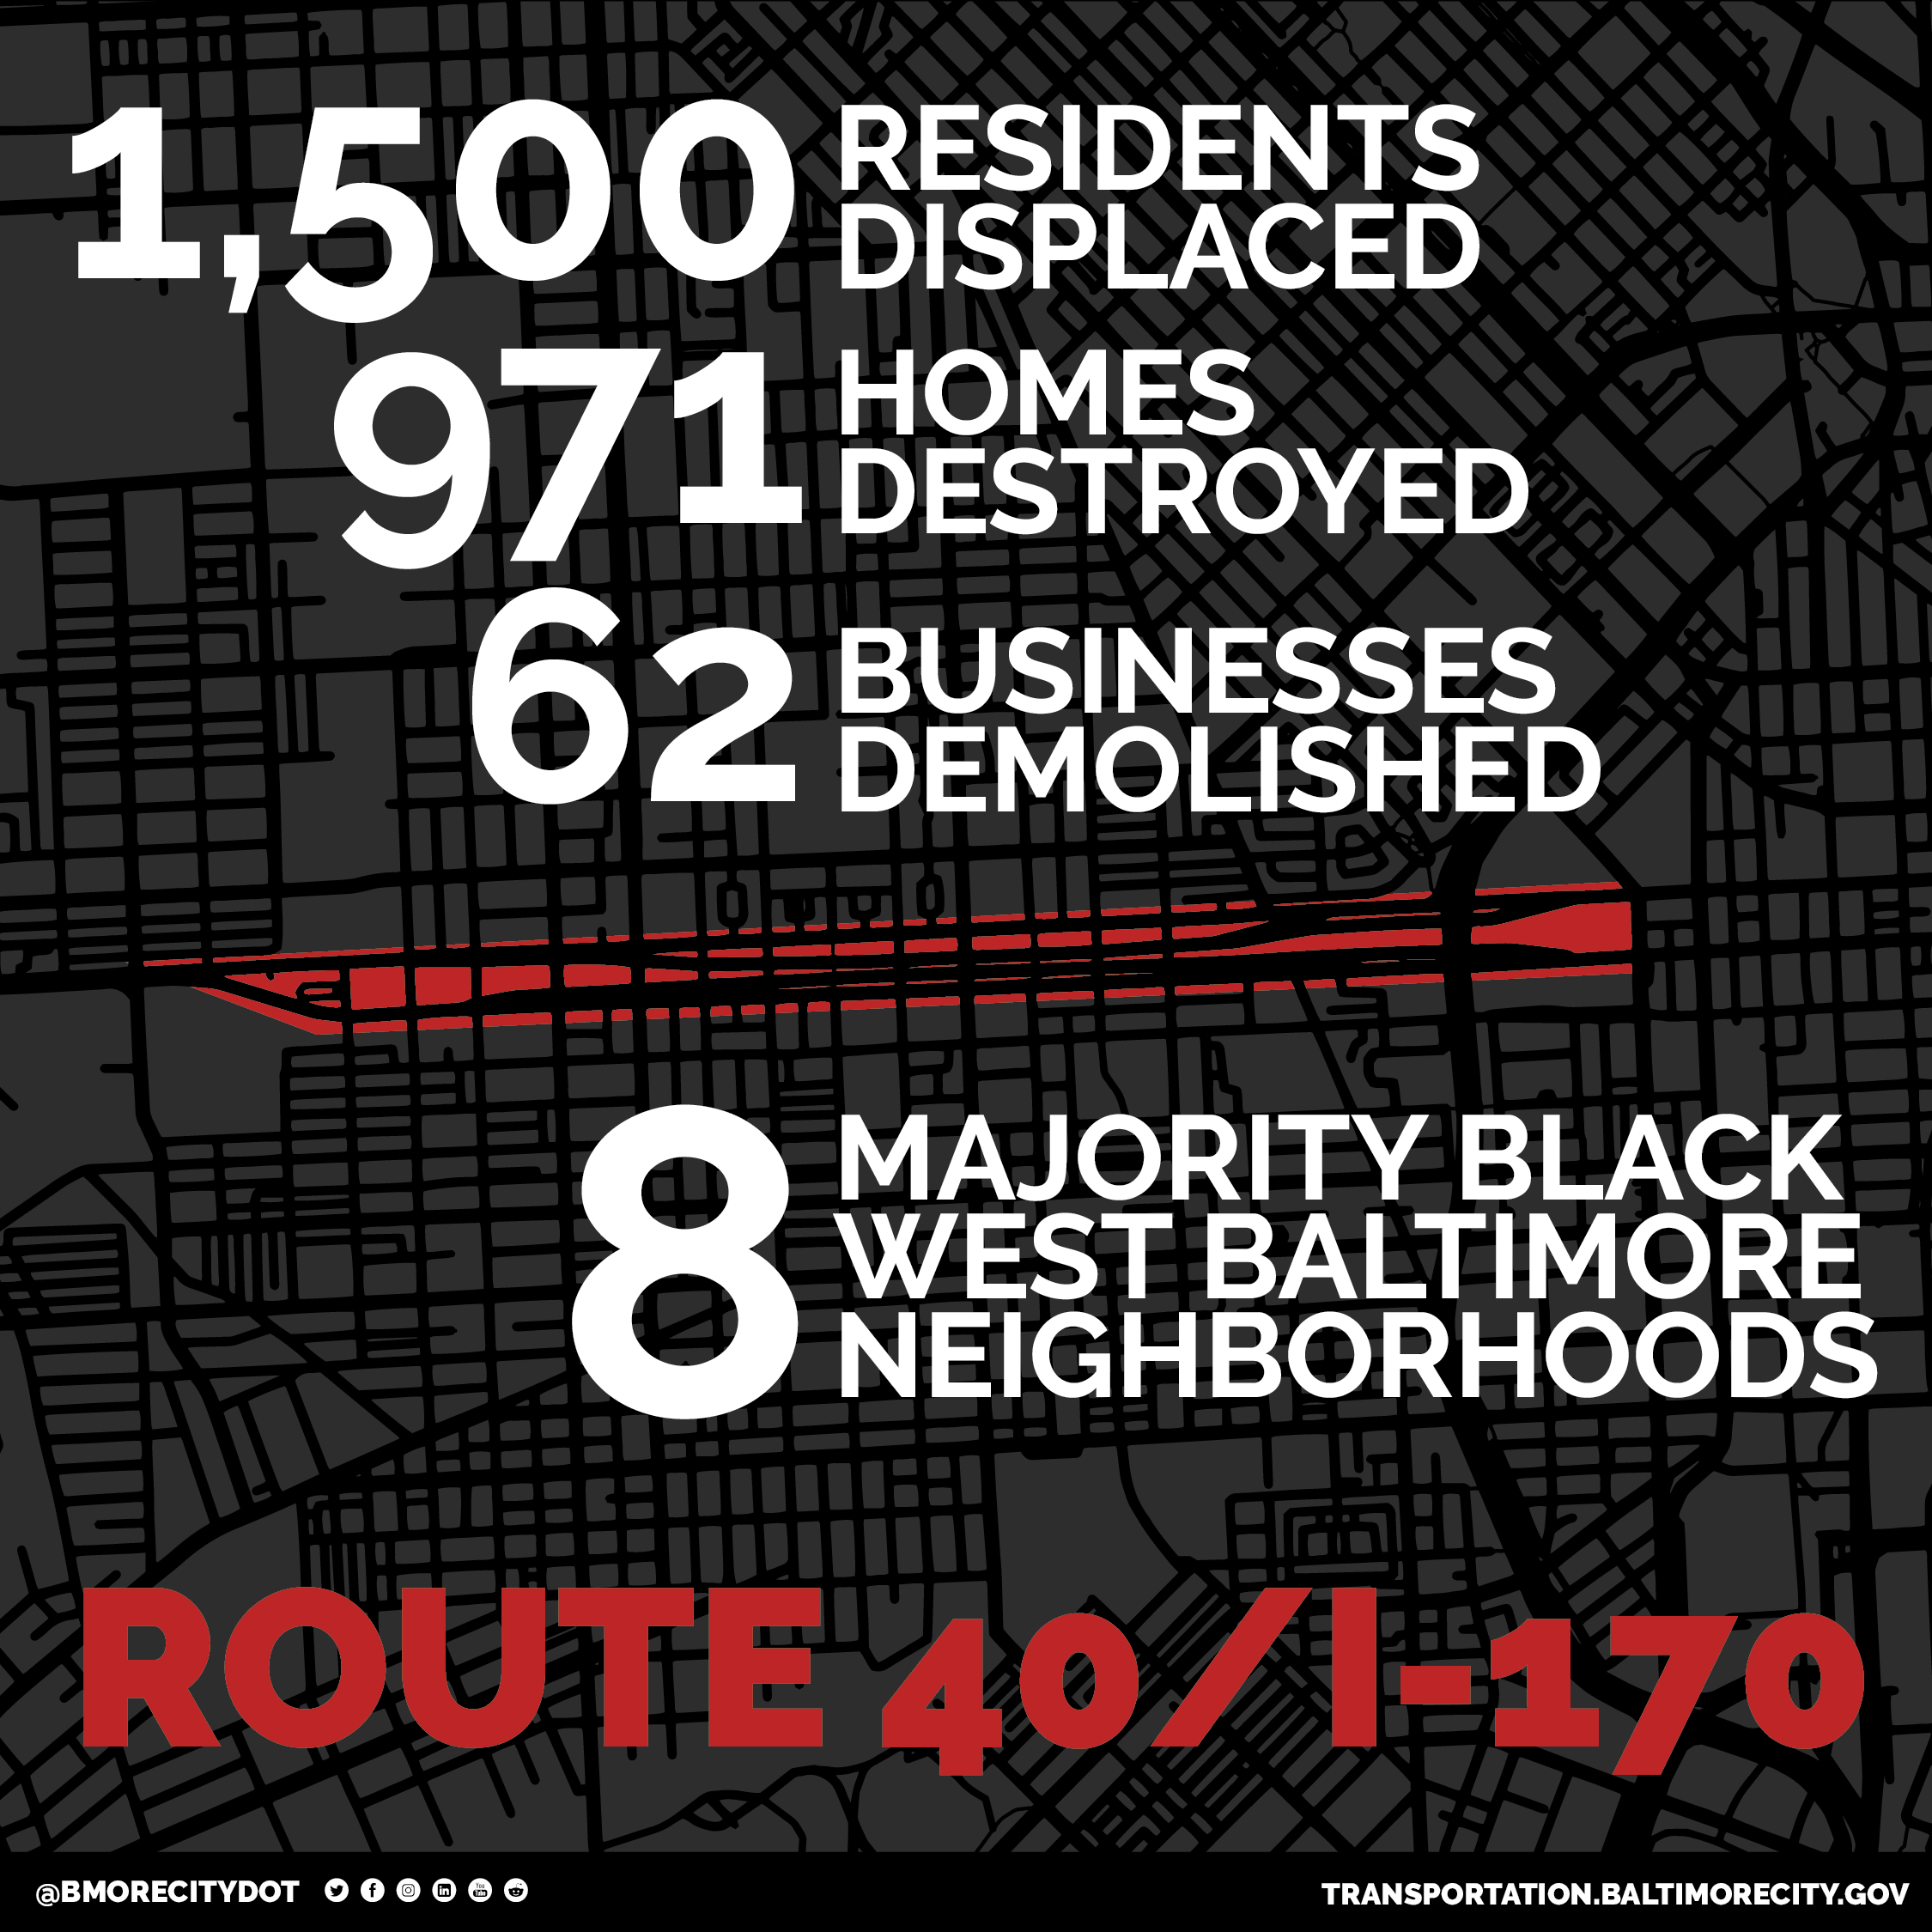 Graphical map of West Baltimore. Graphic reads: 1,500 residents displaced, 971 homes destroyed, 62 businesses demolished, 8 majority Black West Baltimore Neighborhoods. Route 40/I-170